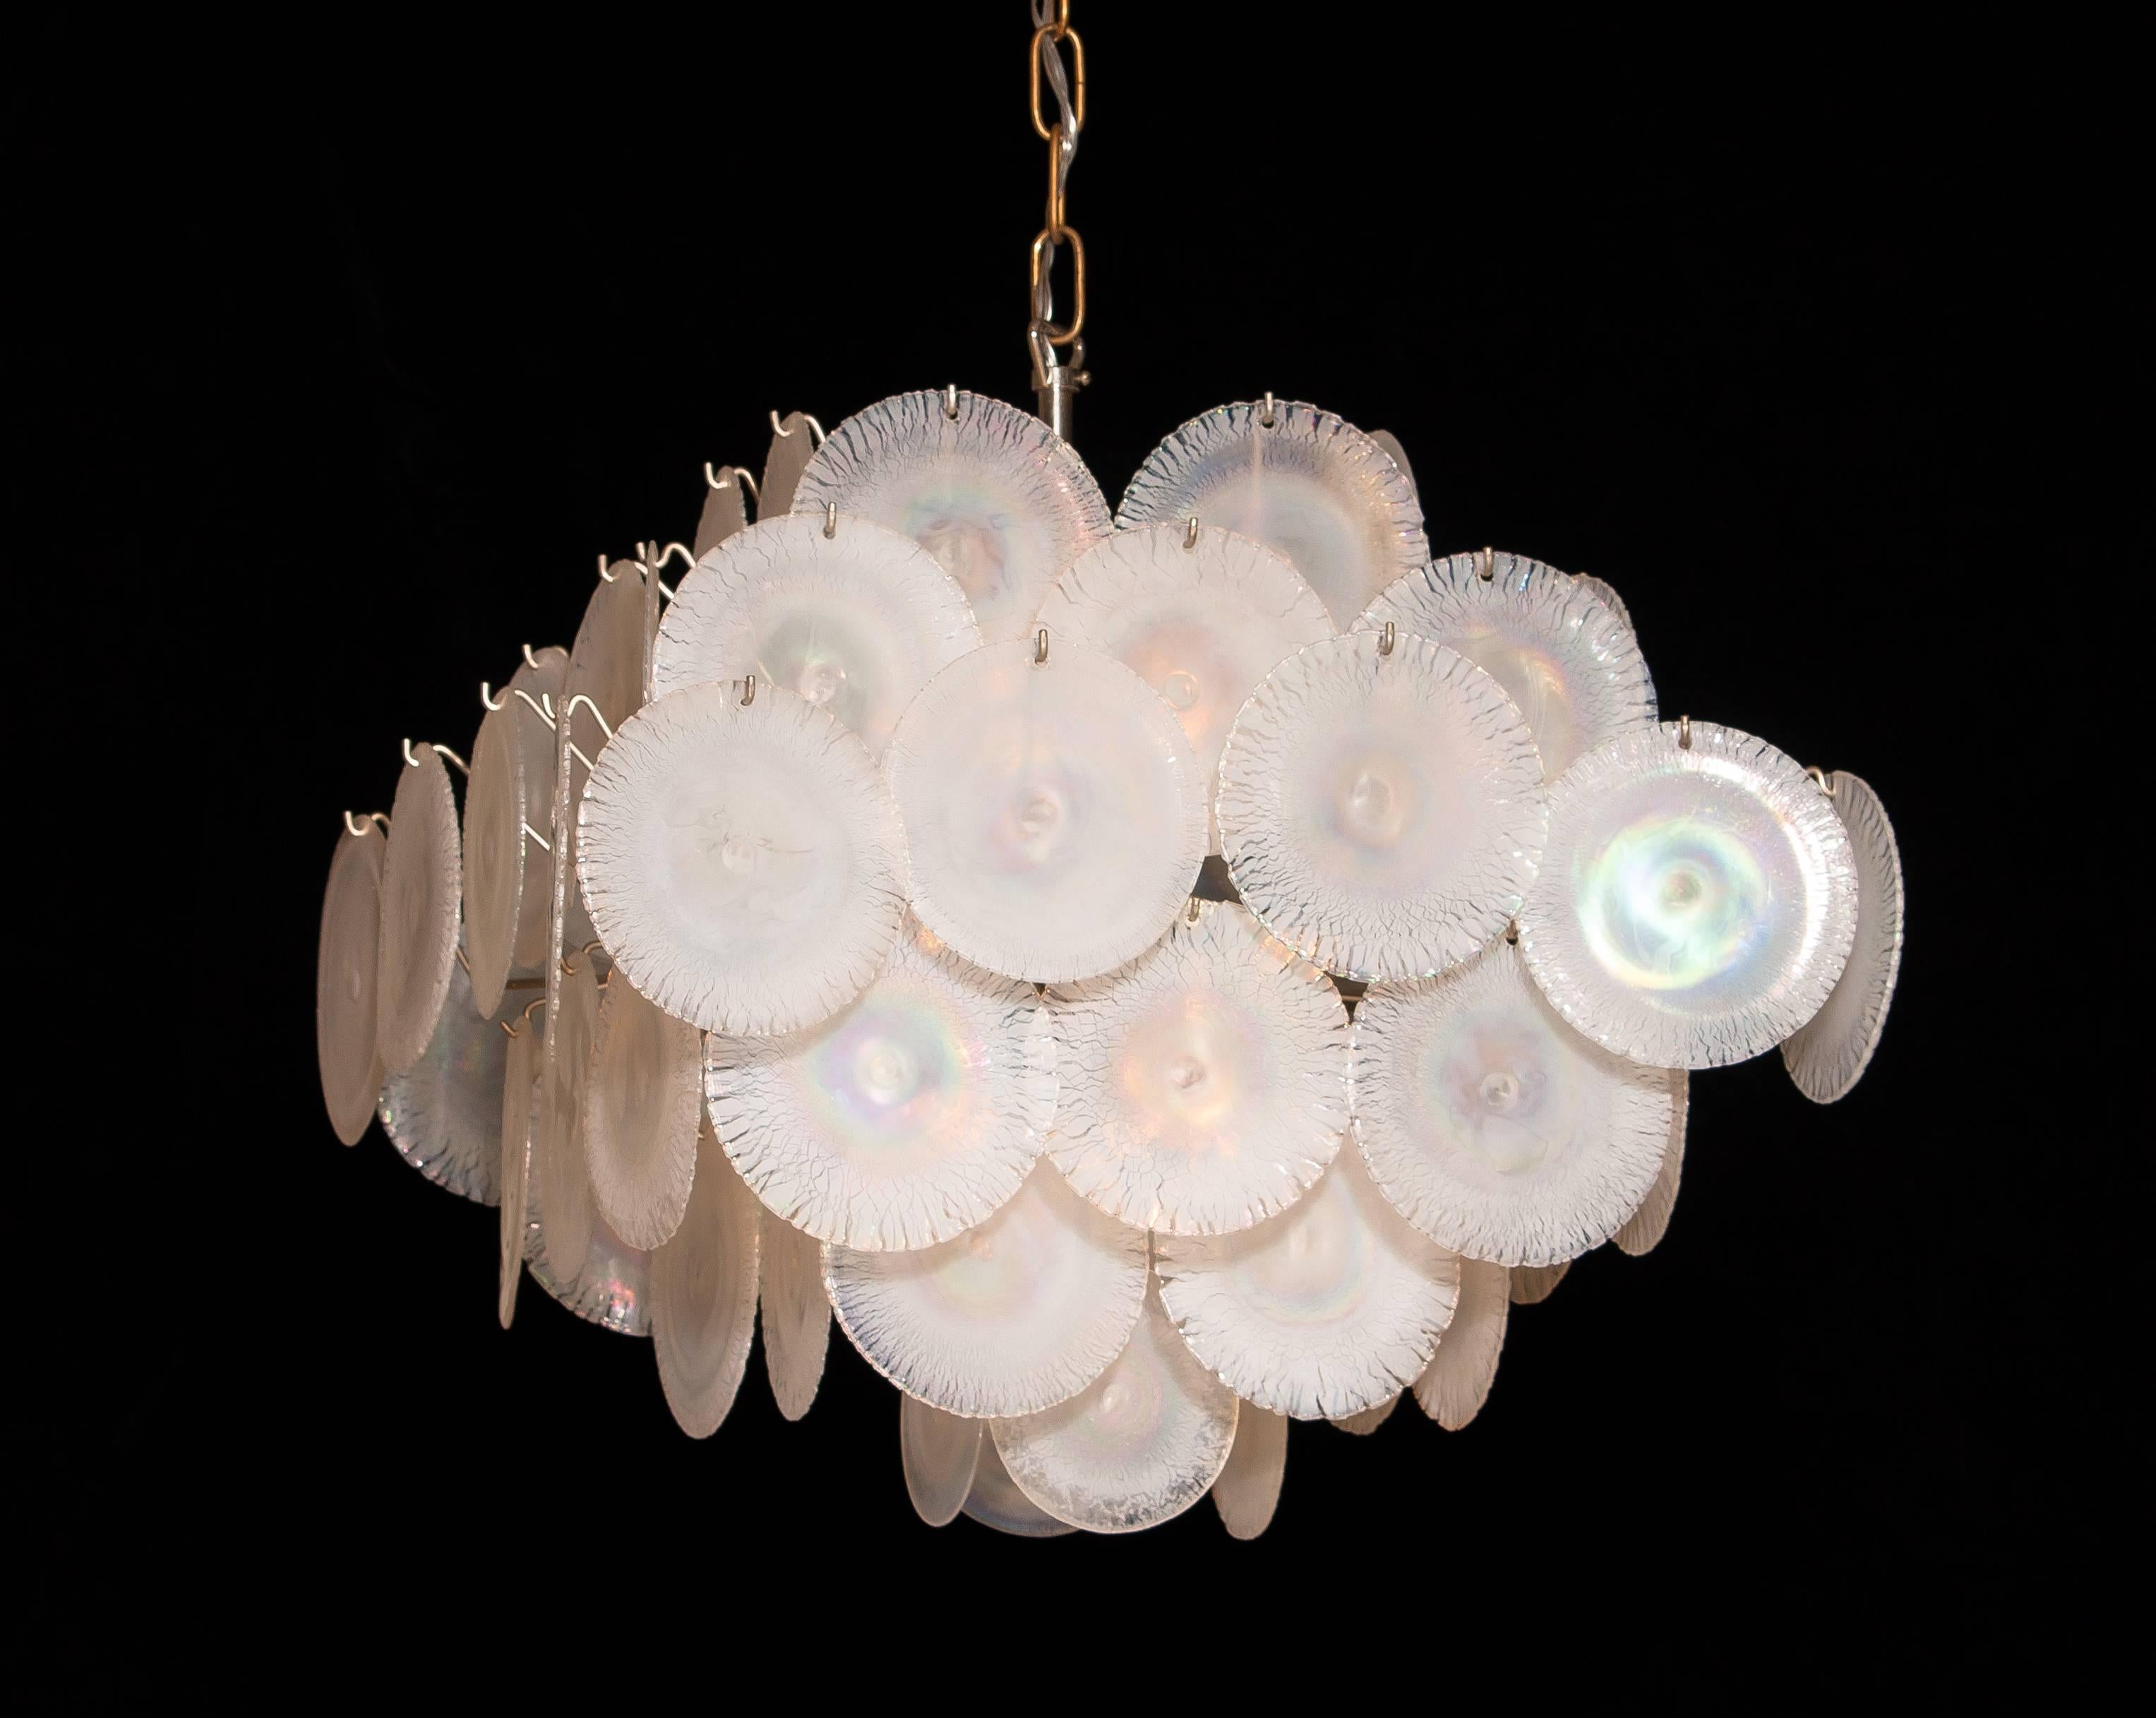 Set of Two Gino Vistosi Chandeliers with White or Pearl Murano Crystal Discs 3